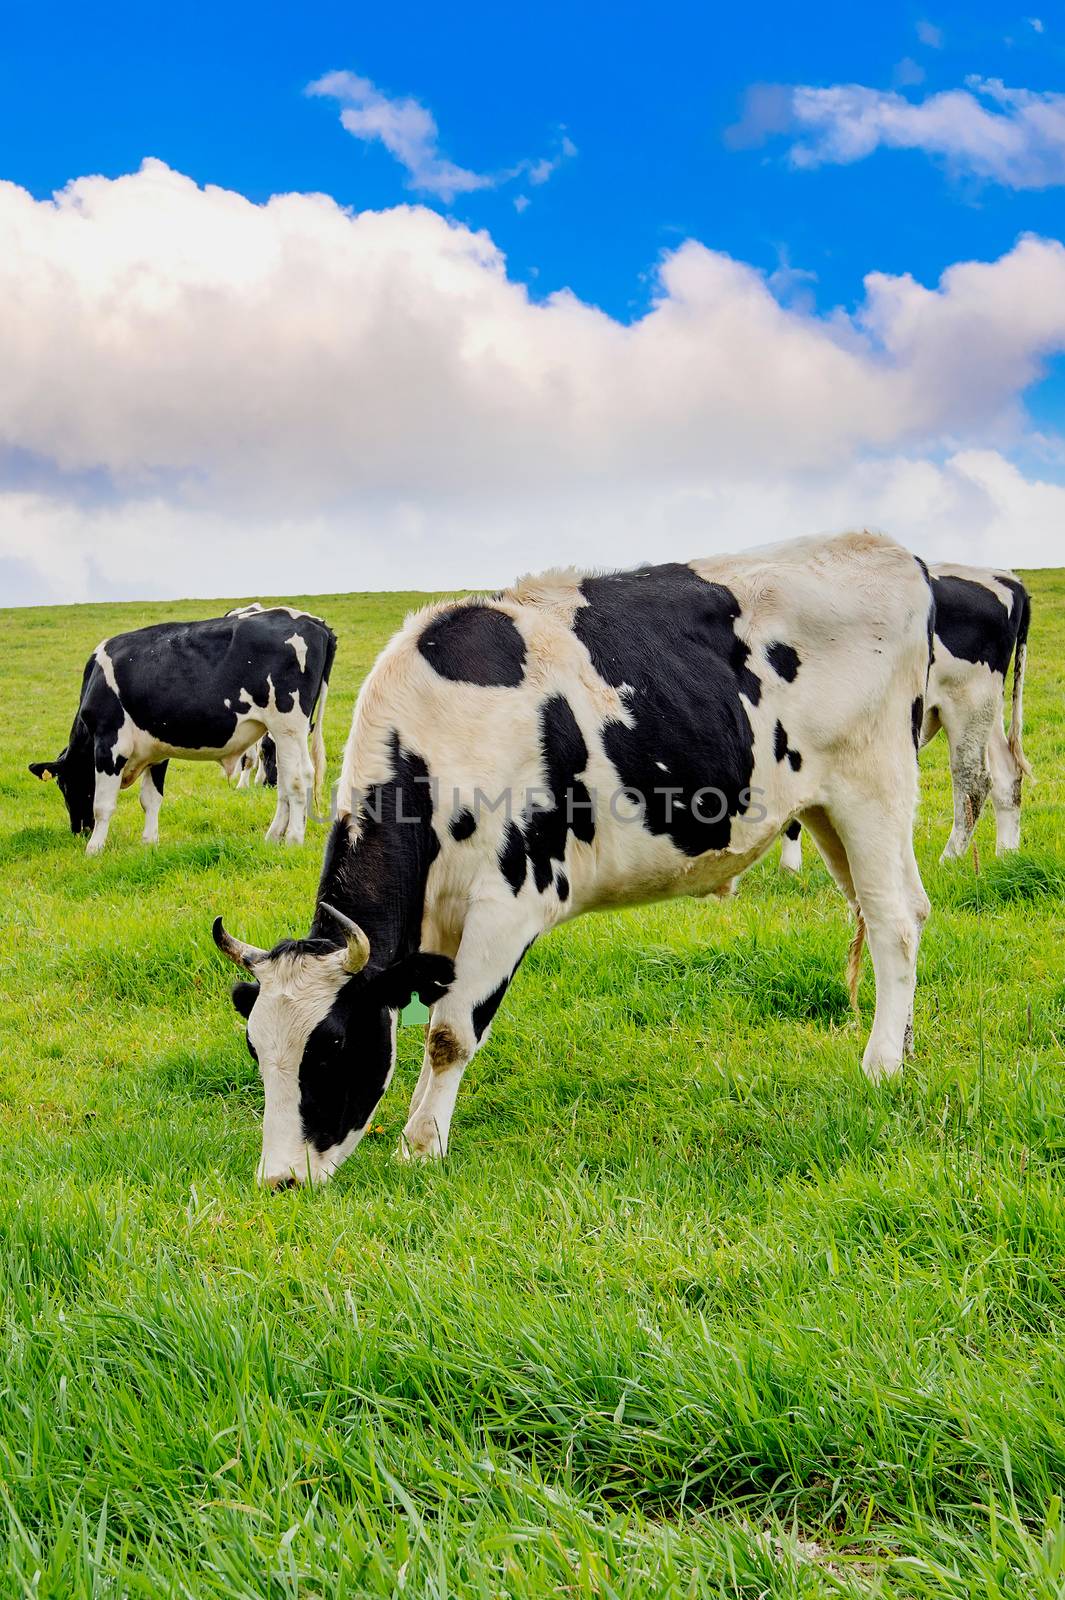 Cows on a green field. by gutarphotoghaphy